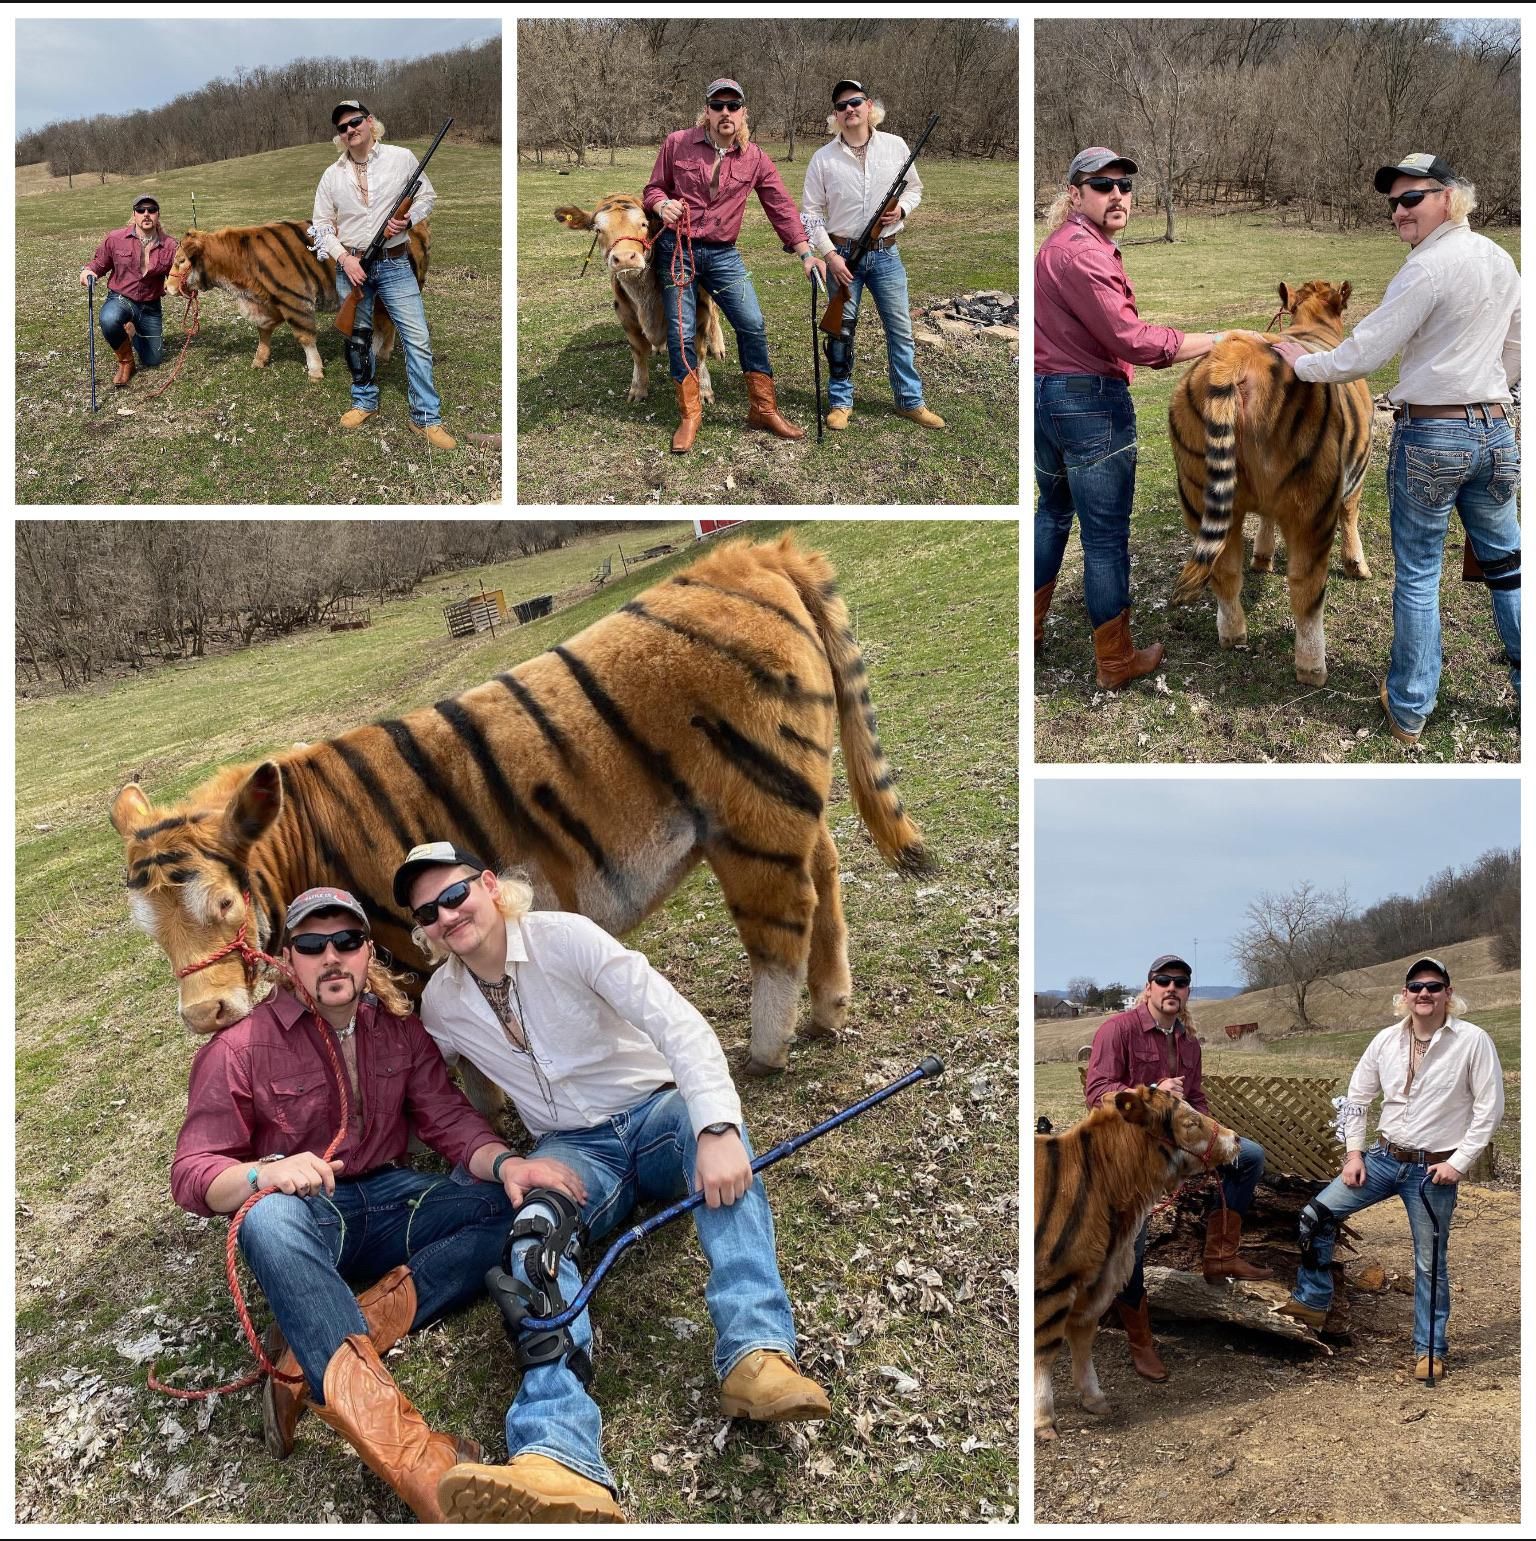 Repost: Some local boys used ANIMAL SAFE paint to make a cow into a tiger for an epic Tiger King photo shoot!